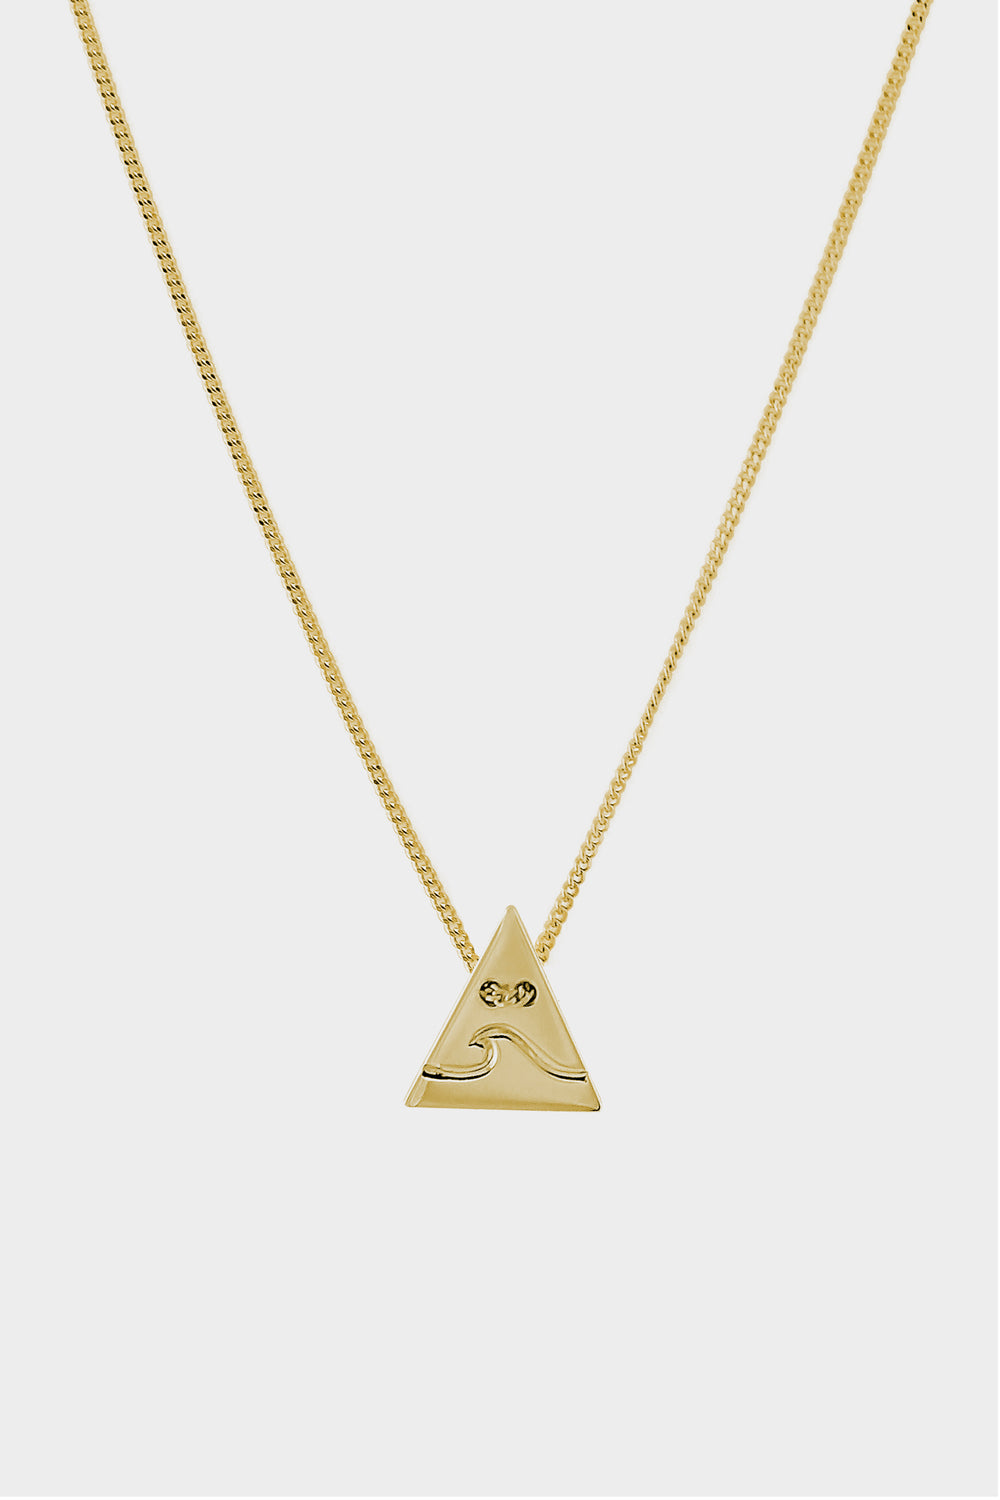 Water Element Necklace | 9K Gold